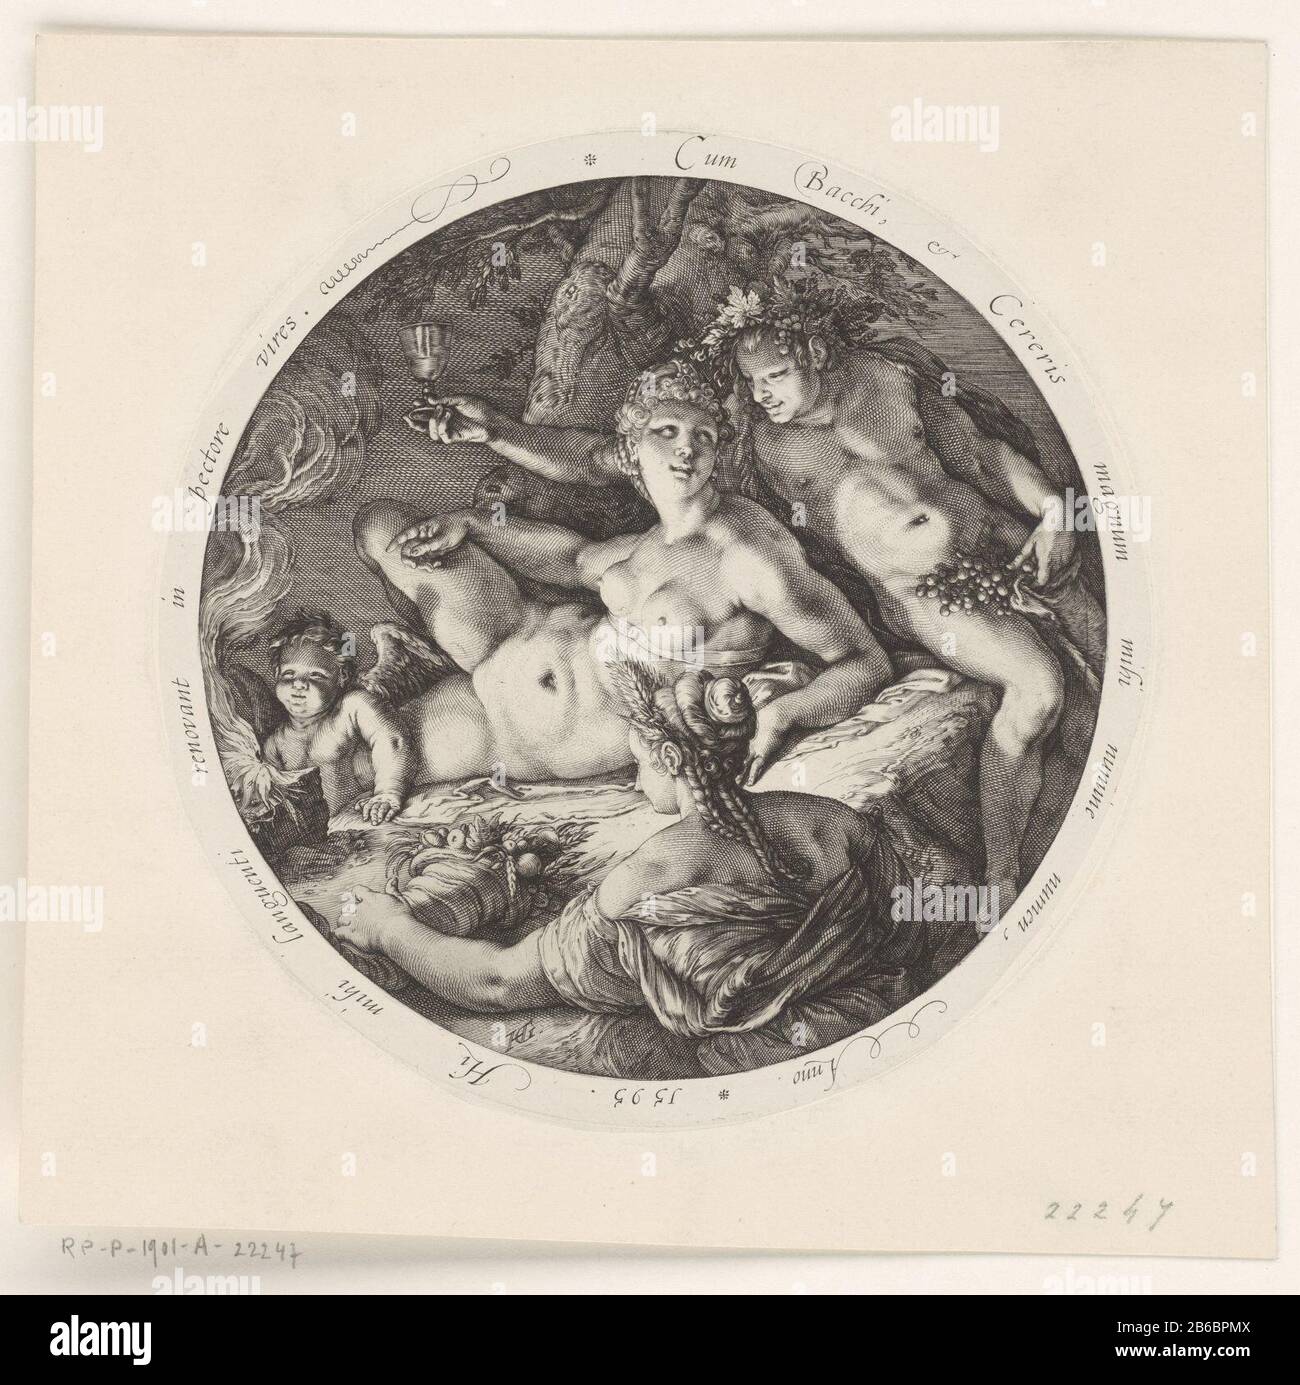 Bacchus, Ceres en Venus Night Piece of Bacchus, Ceres, Venus and Cupid. Posted in oval, Latin text rondom. Manufacturer : printmaker: Hendrick Goltzius to design: Hendrick Goltzius Inspirer: Michelangelo Date: 1595 Physical features: engra in silver material: paper Technique: engra in silver Dimensions: d 165 mm Stock Photo